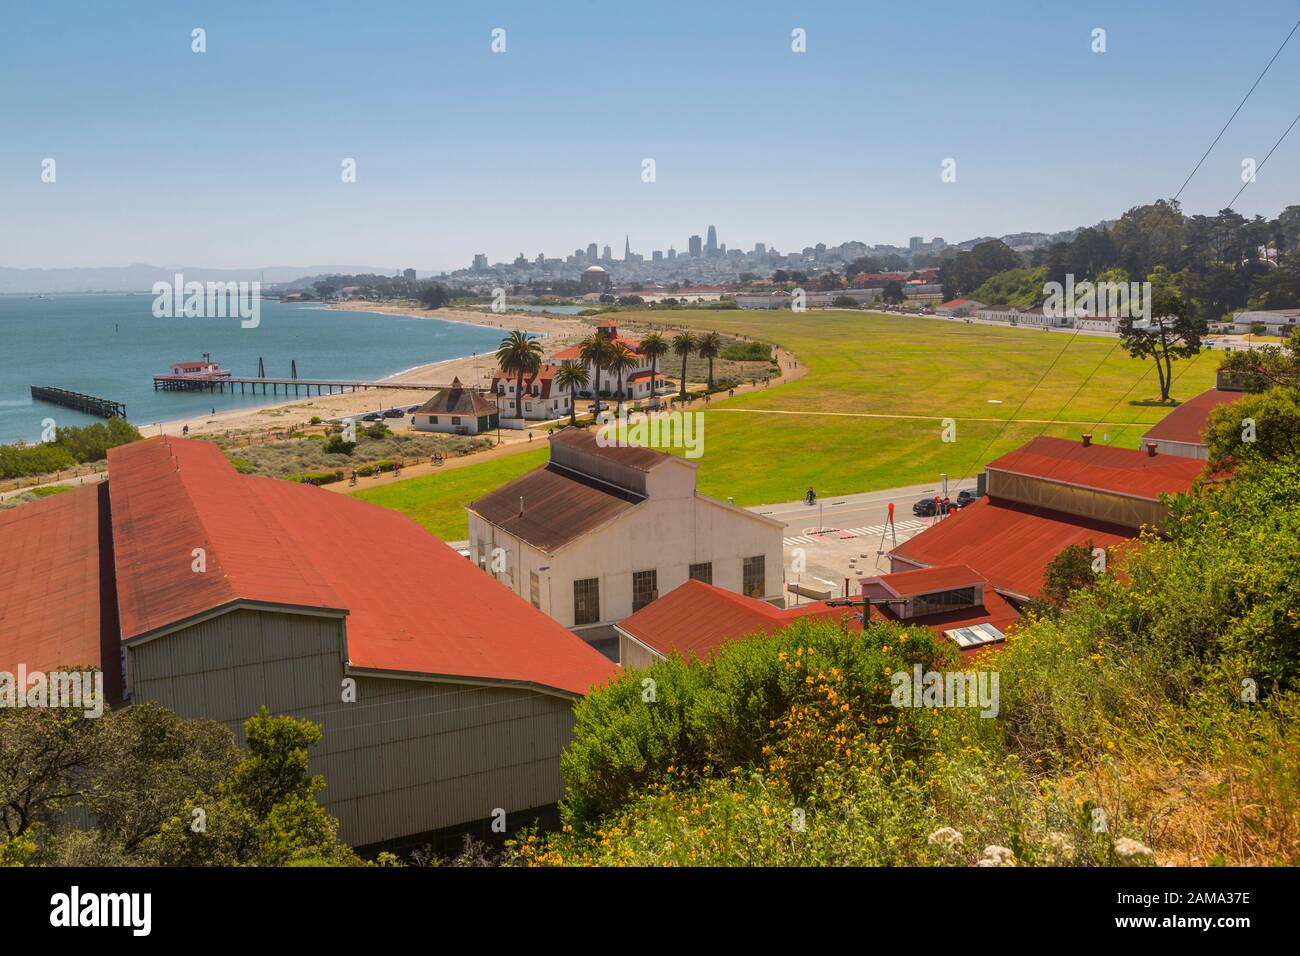 View of West Bluff Picnic Area and city skyline backdrop, San Francisco, California, USA, North America Stock Photo